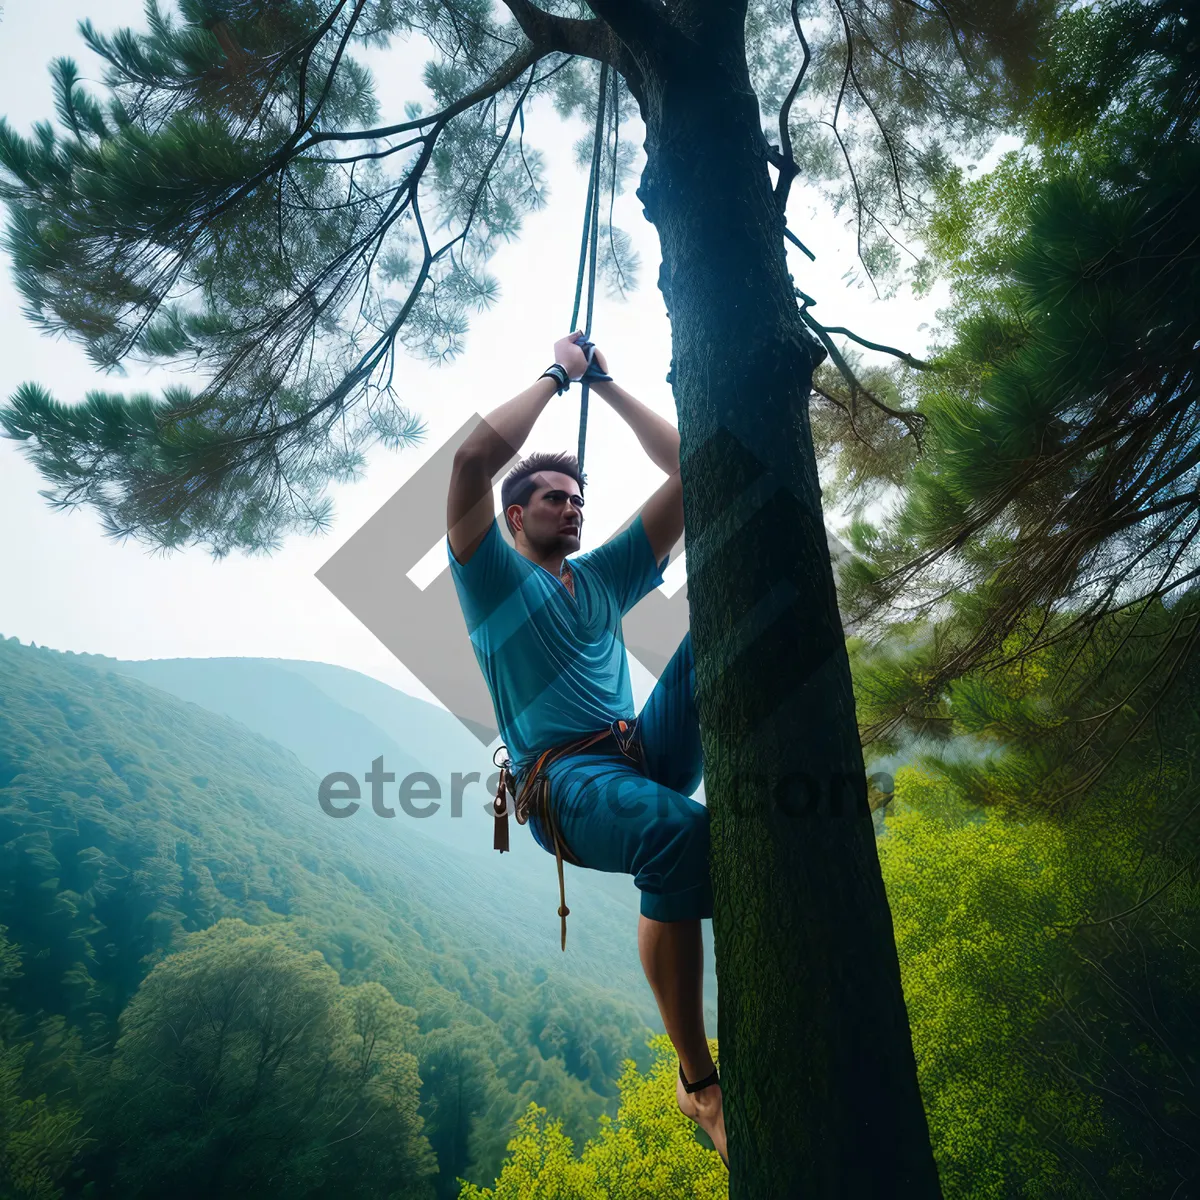 Picture of Forest Swing Fun 
or
Gymnastic Outdoor Swing 
or
Trampoline Park Adventure 
or
Mechanical Tree Swing 
or
Outdoor Playtime on the Swing